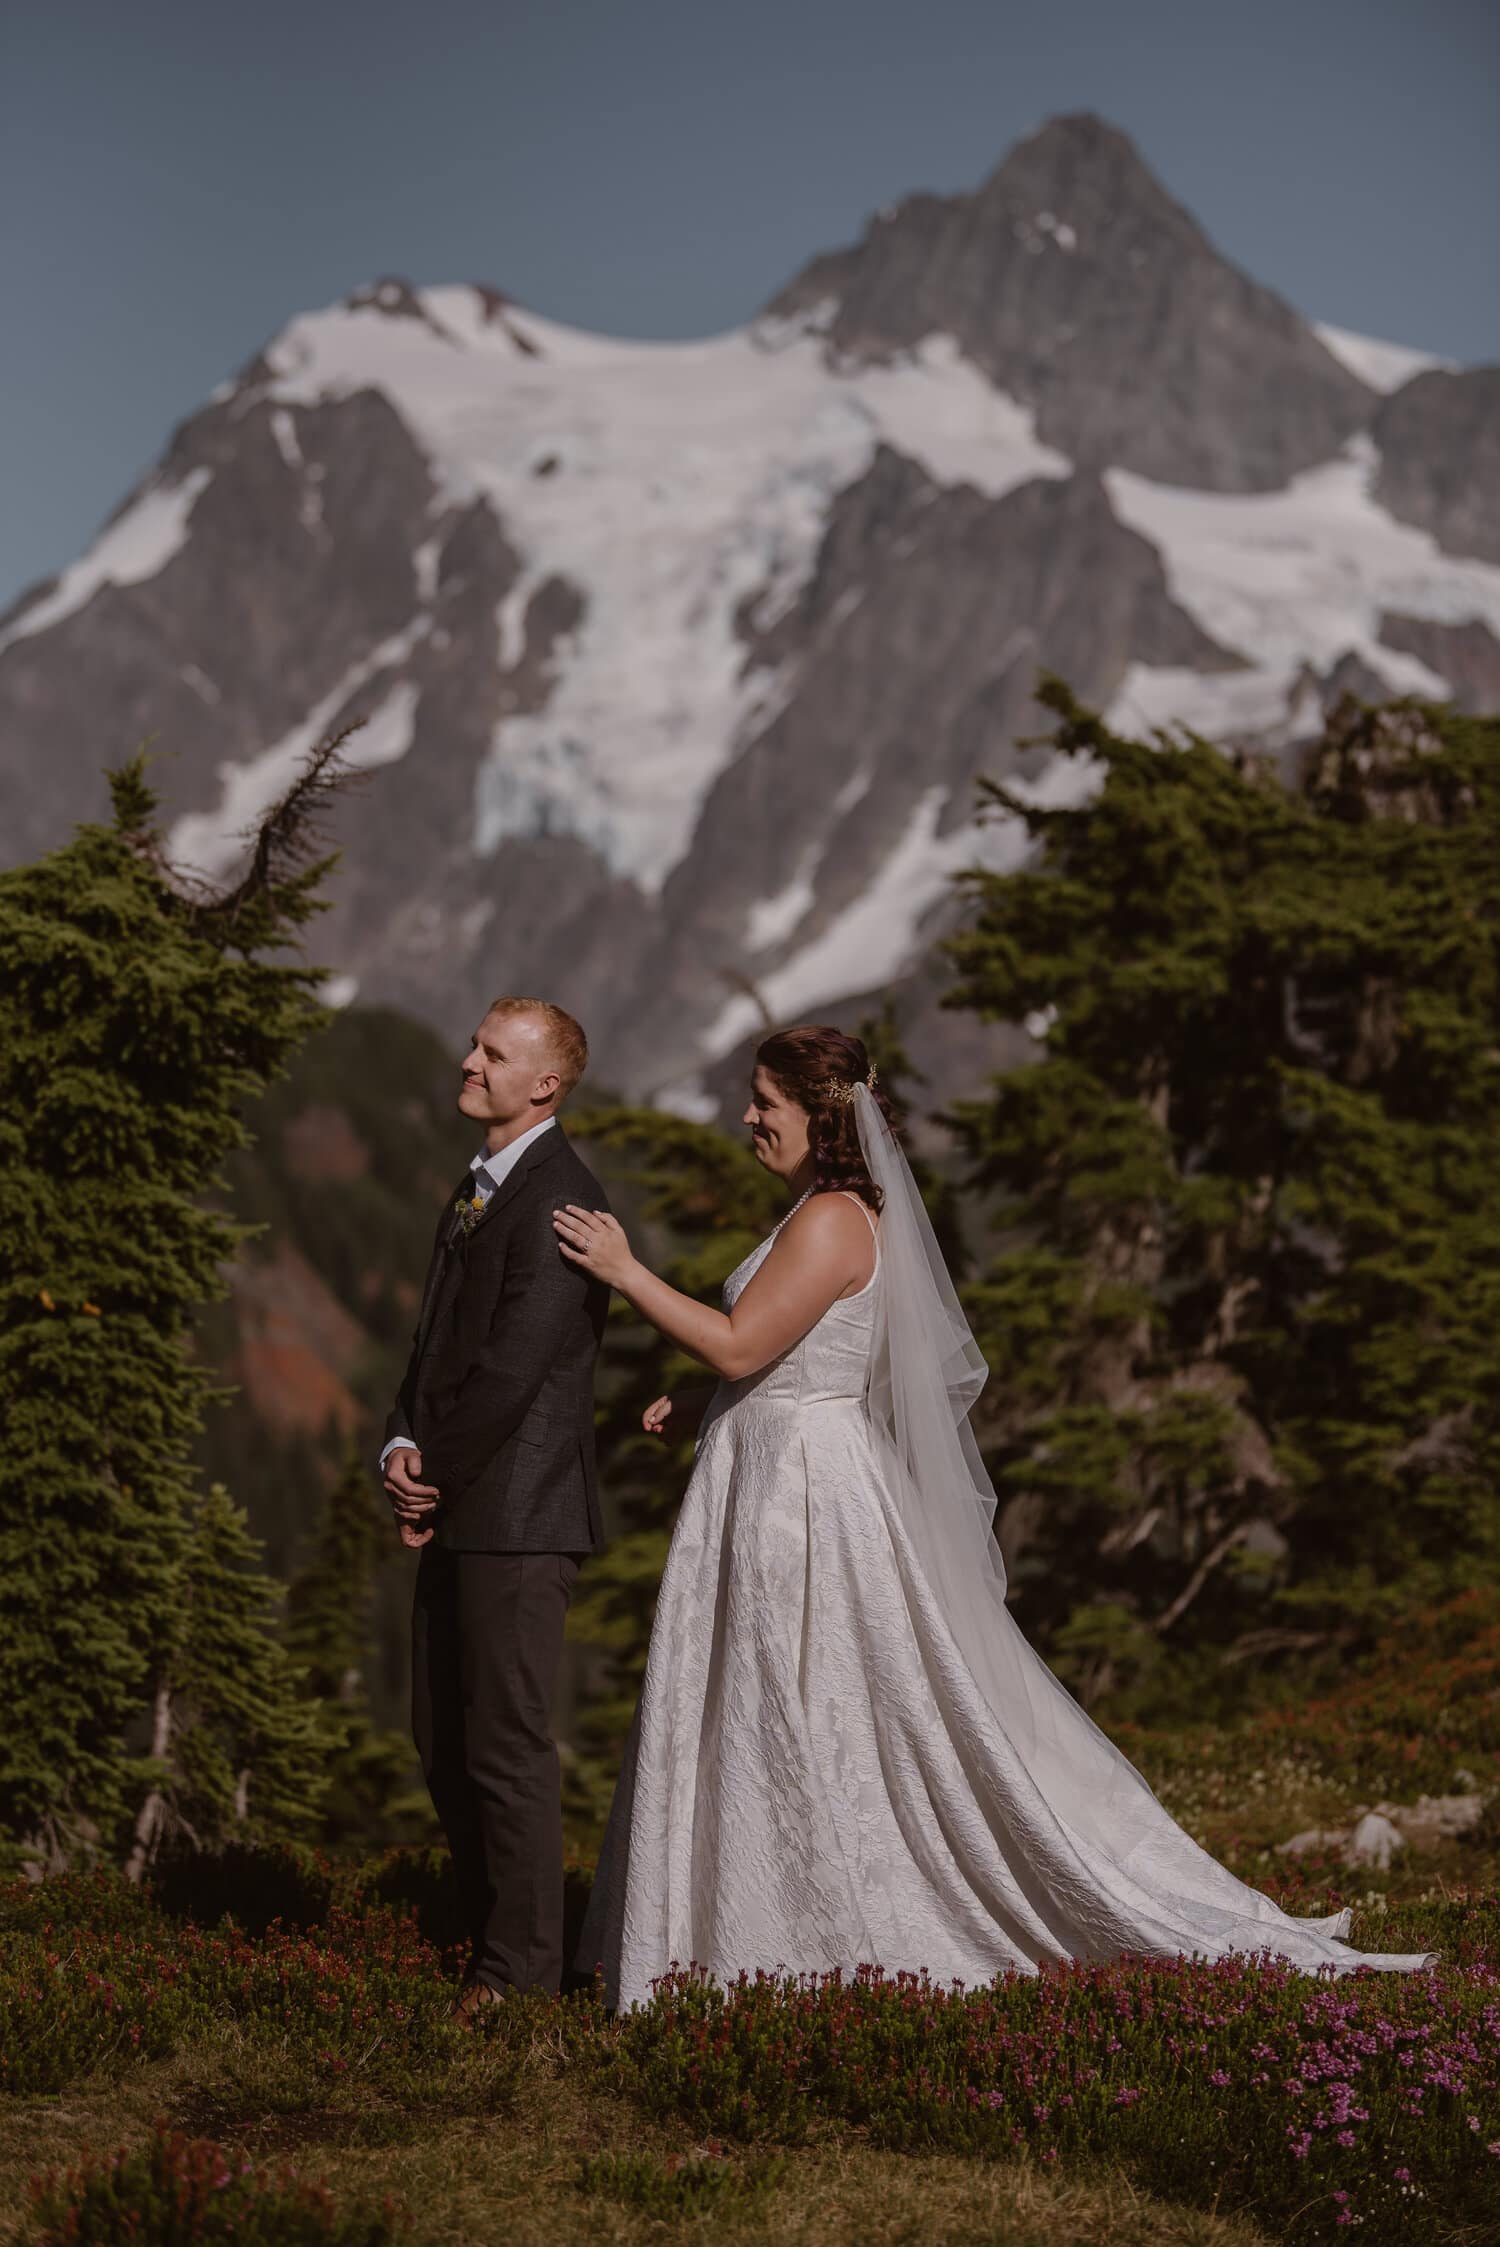 Bride approaches groom for a first look on their elopement day in Washington. Mount Shuksan is in the background, and there are trees and wildflowers around them. 